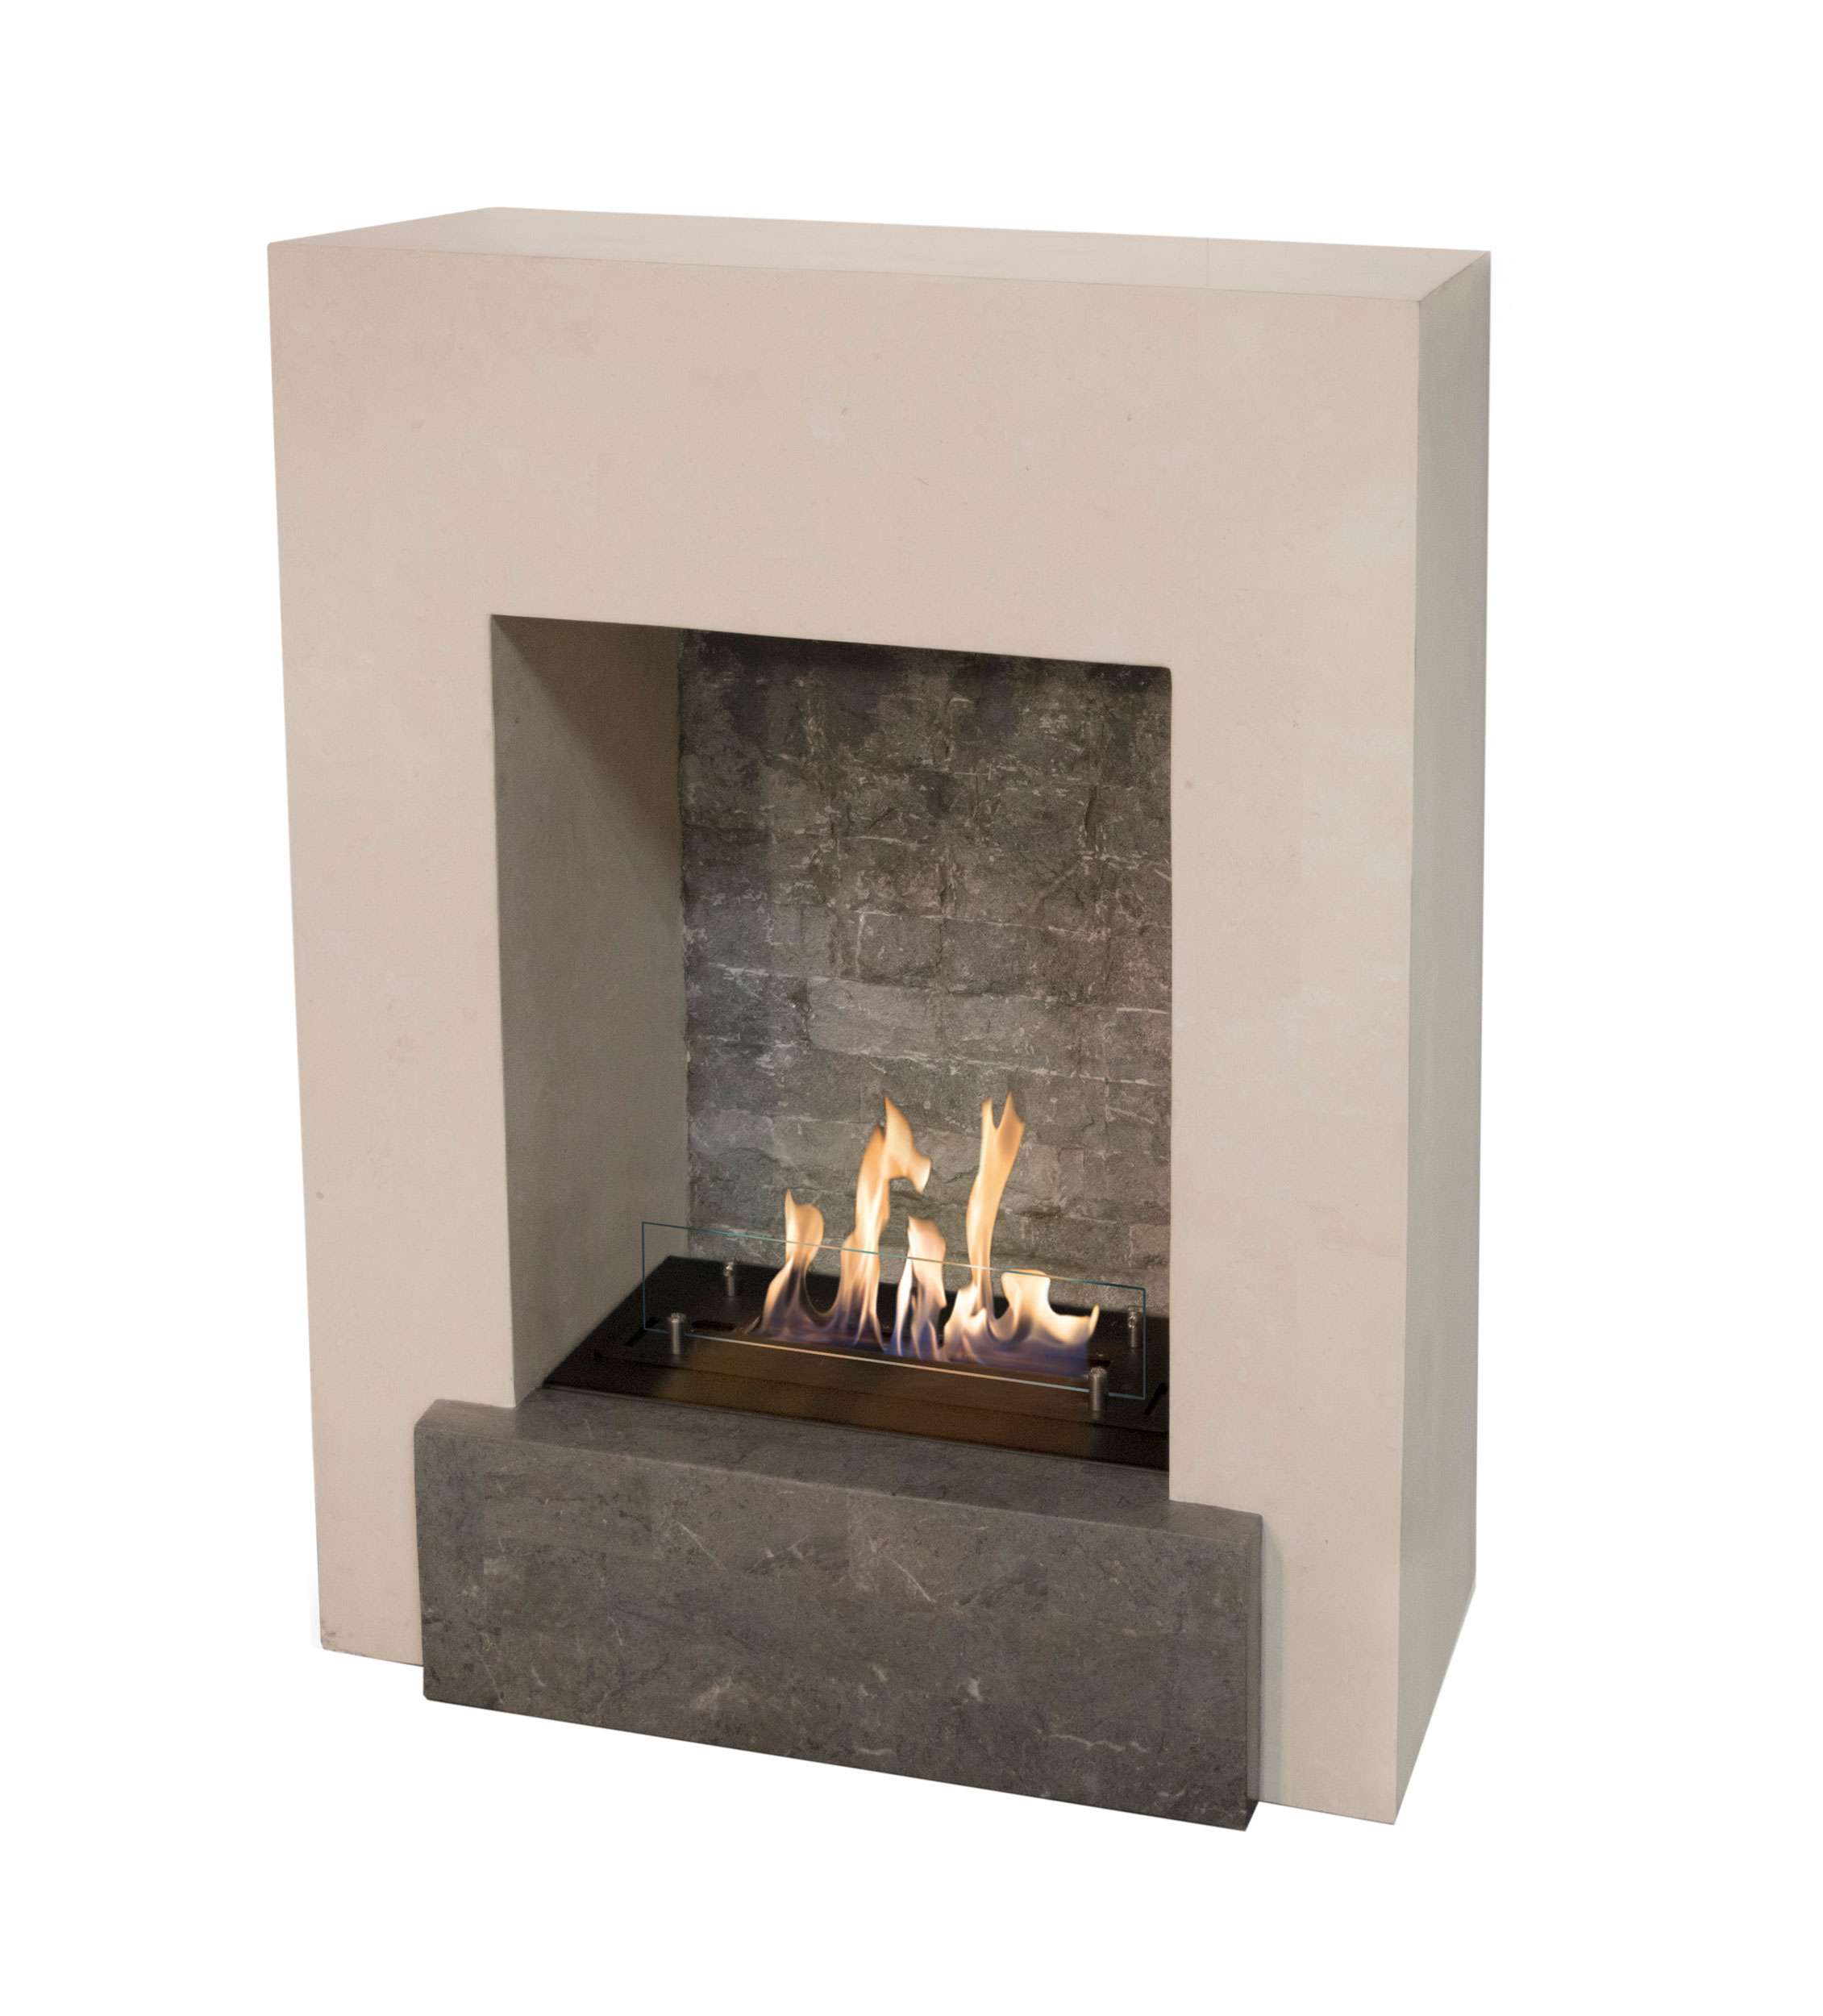 Cool Fireplaces Luxury Ethanol Kamin Ruby Fires todos Kaufen